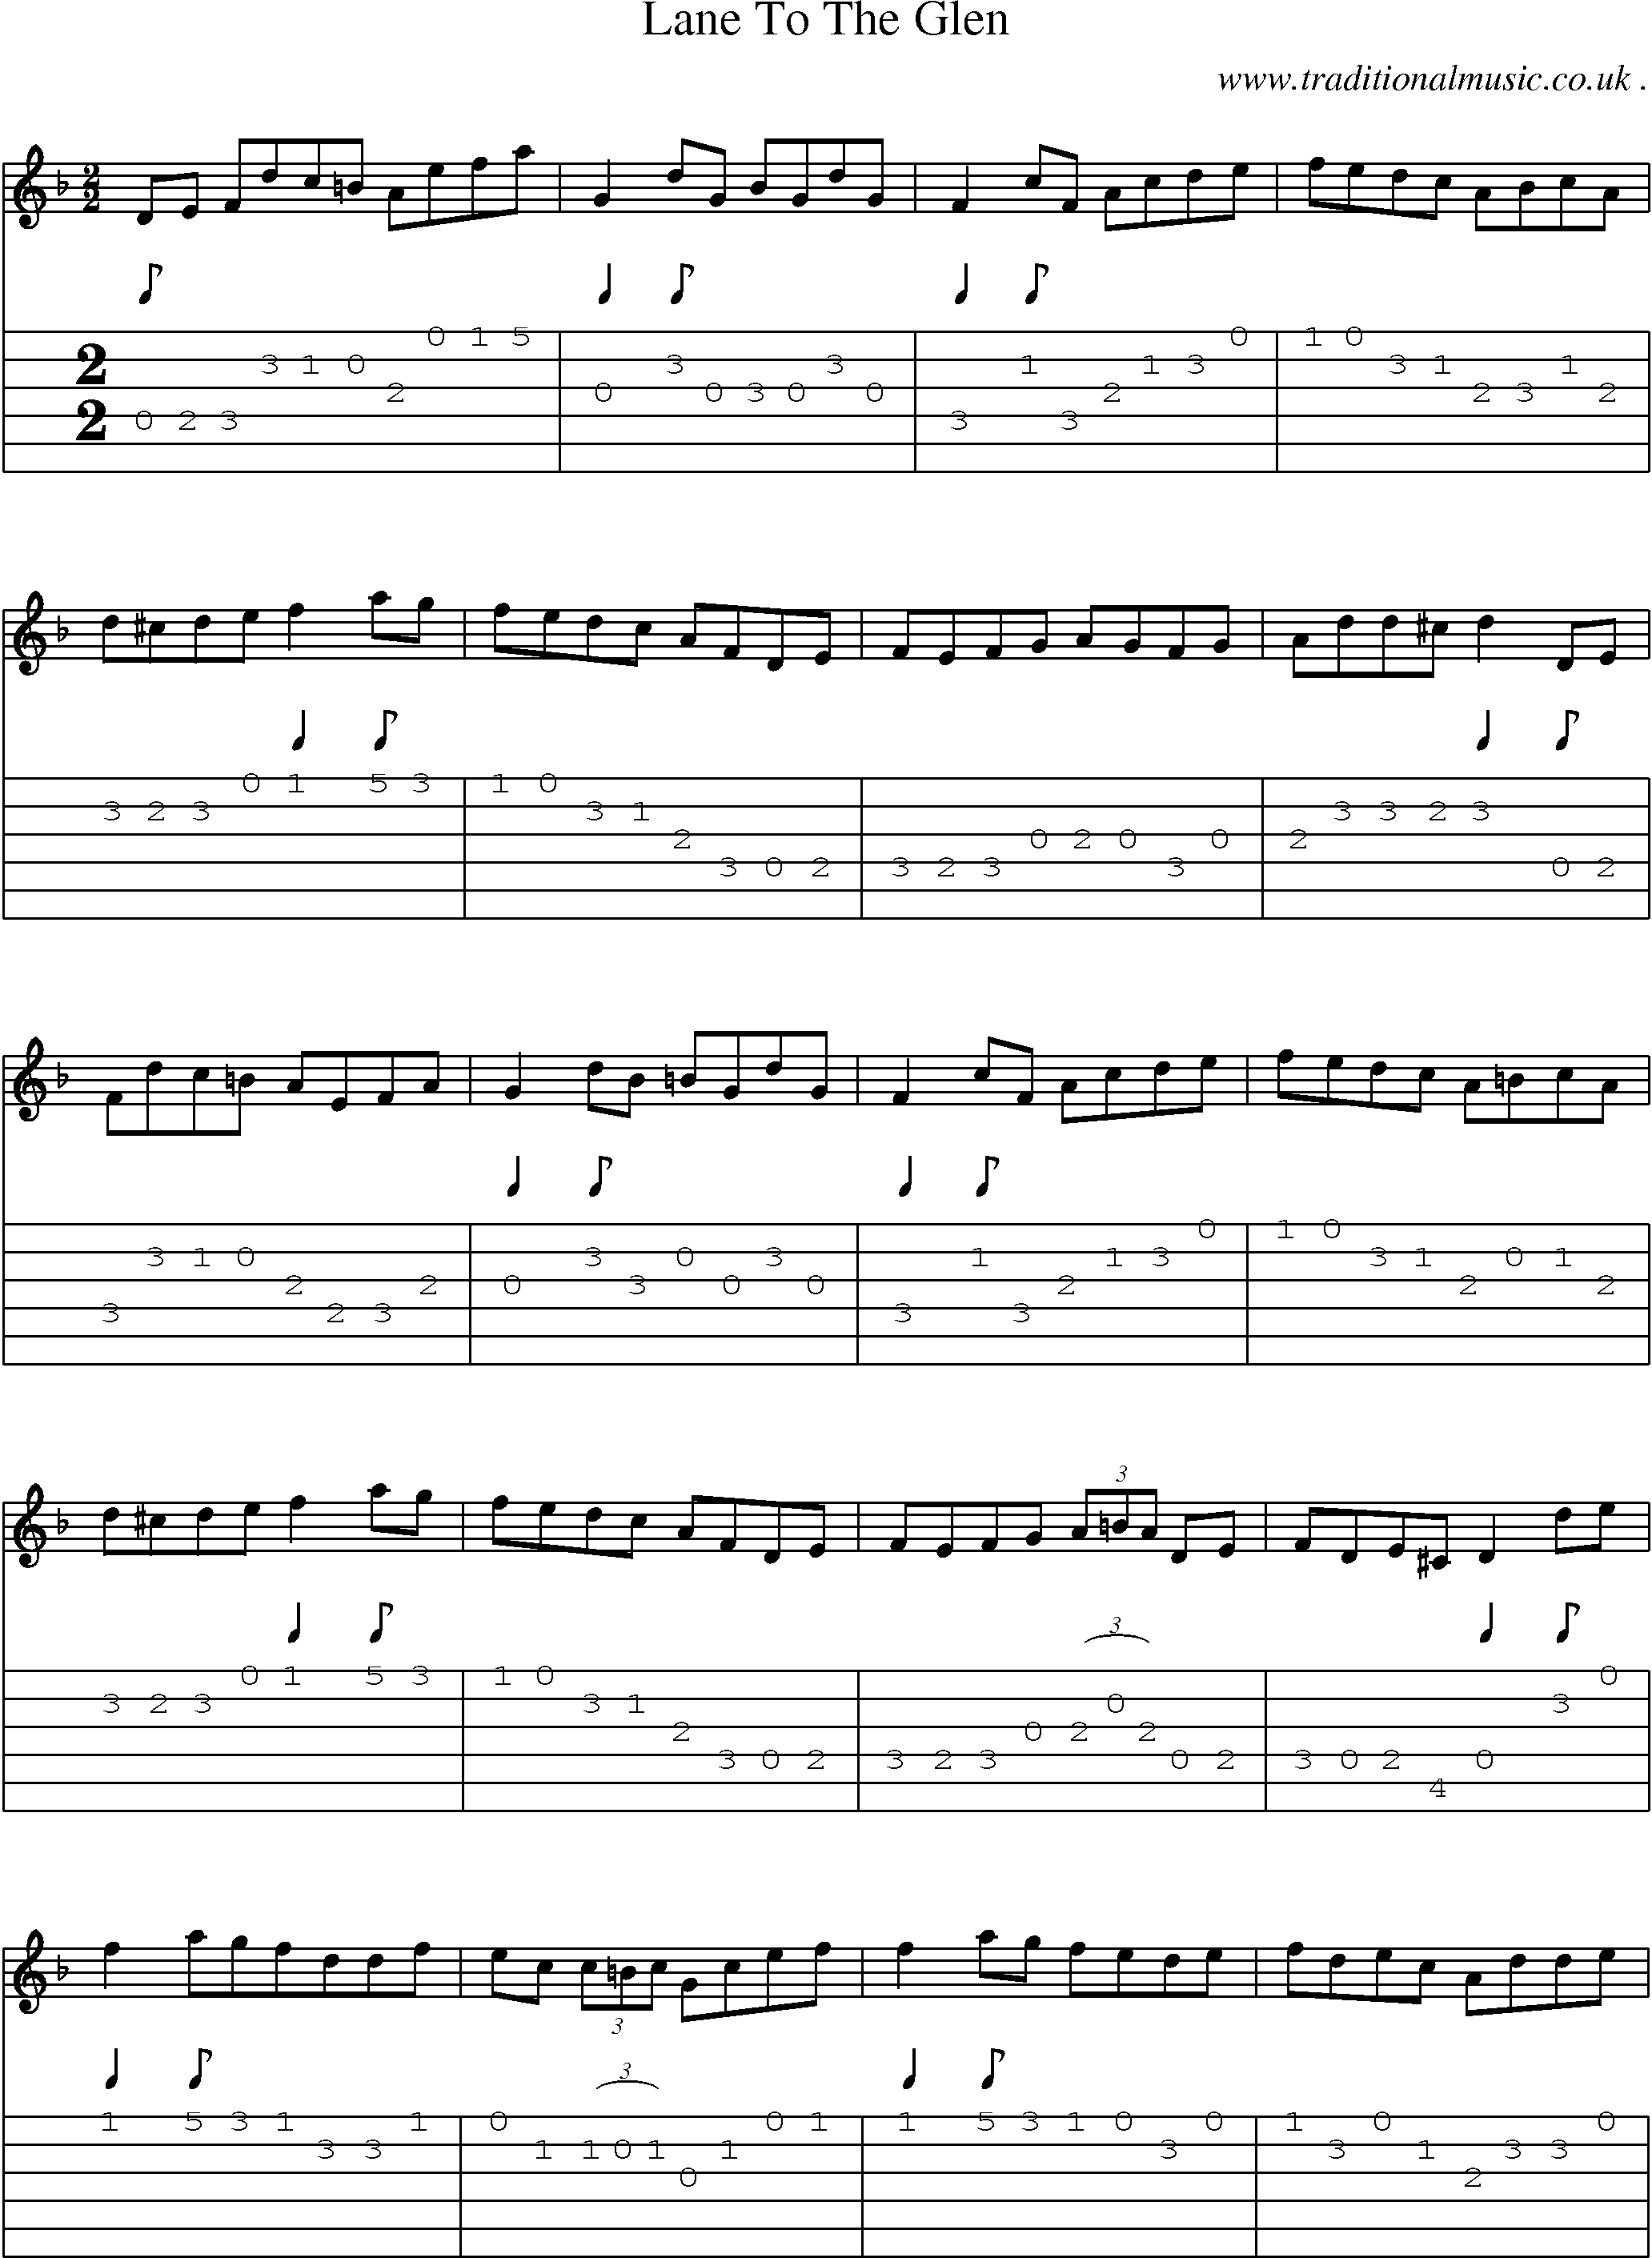 Sheet-Music and Guitar Tabs for Lane To The Glen